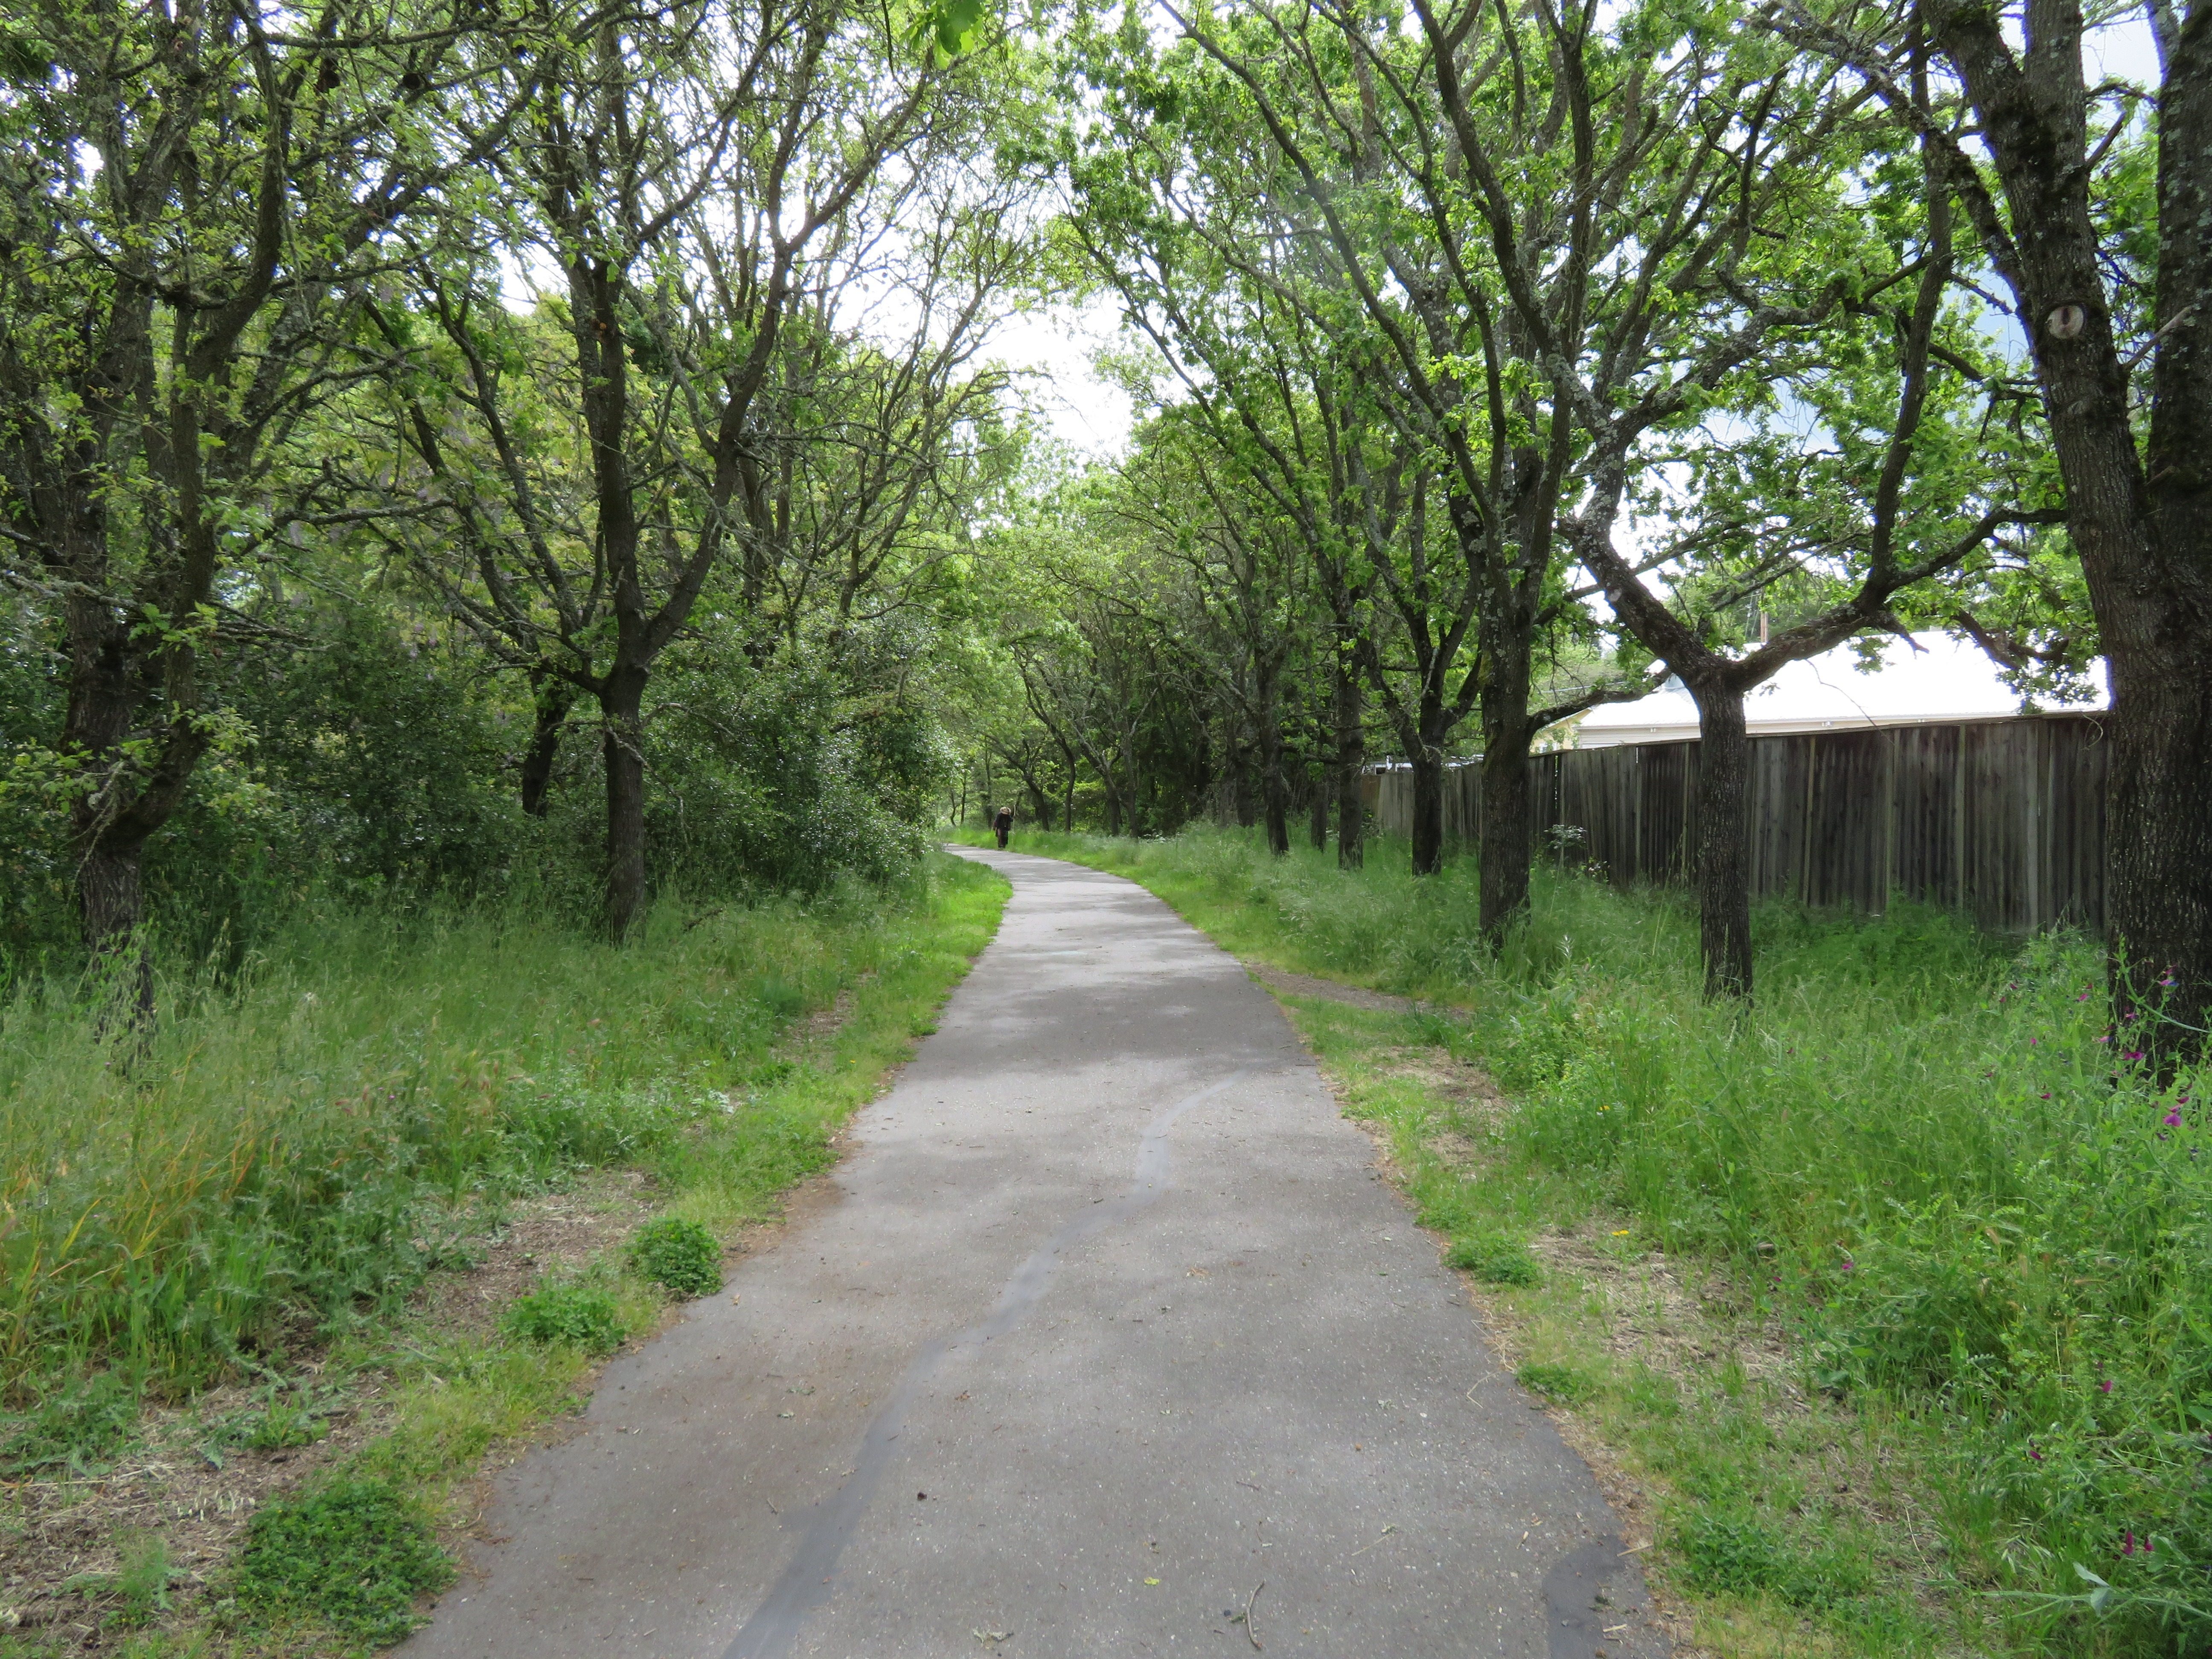 Paved grey e-bike path down the center of the image, with tall green bushes and trees on either side of the path